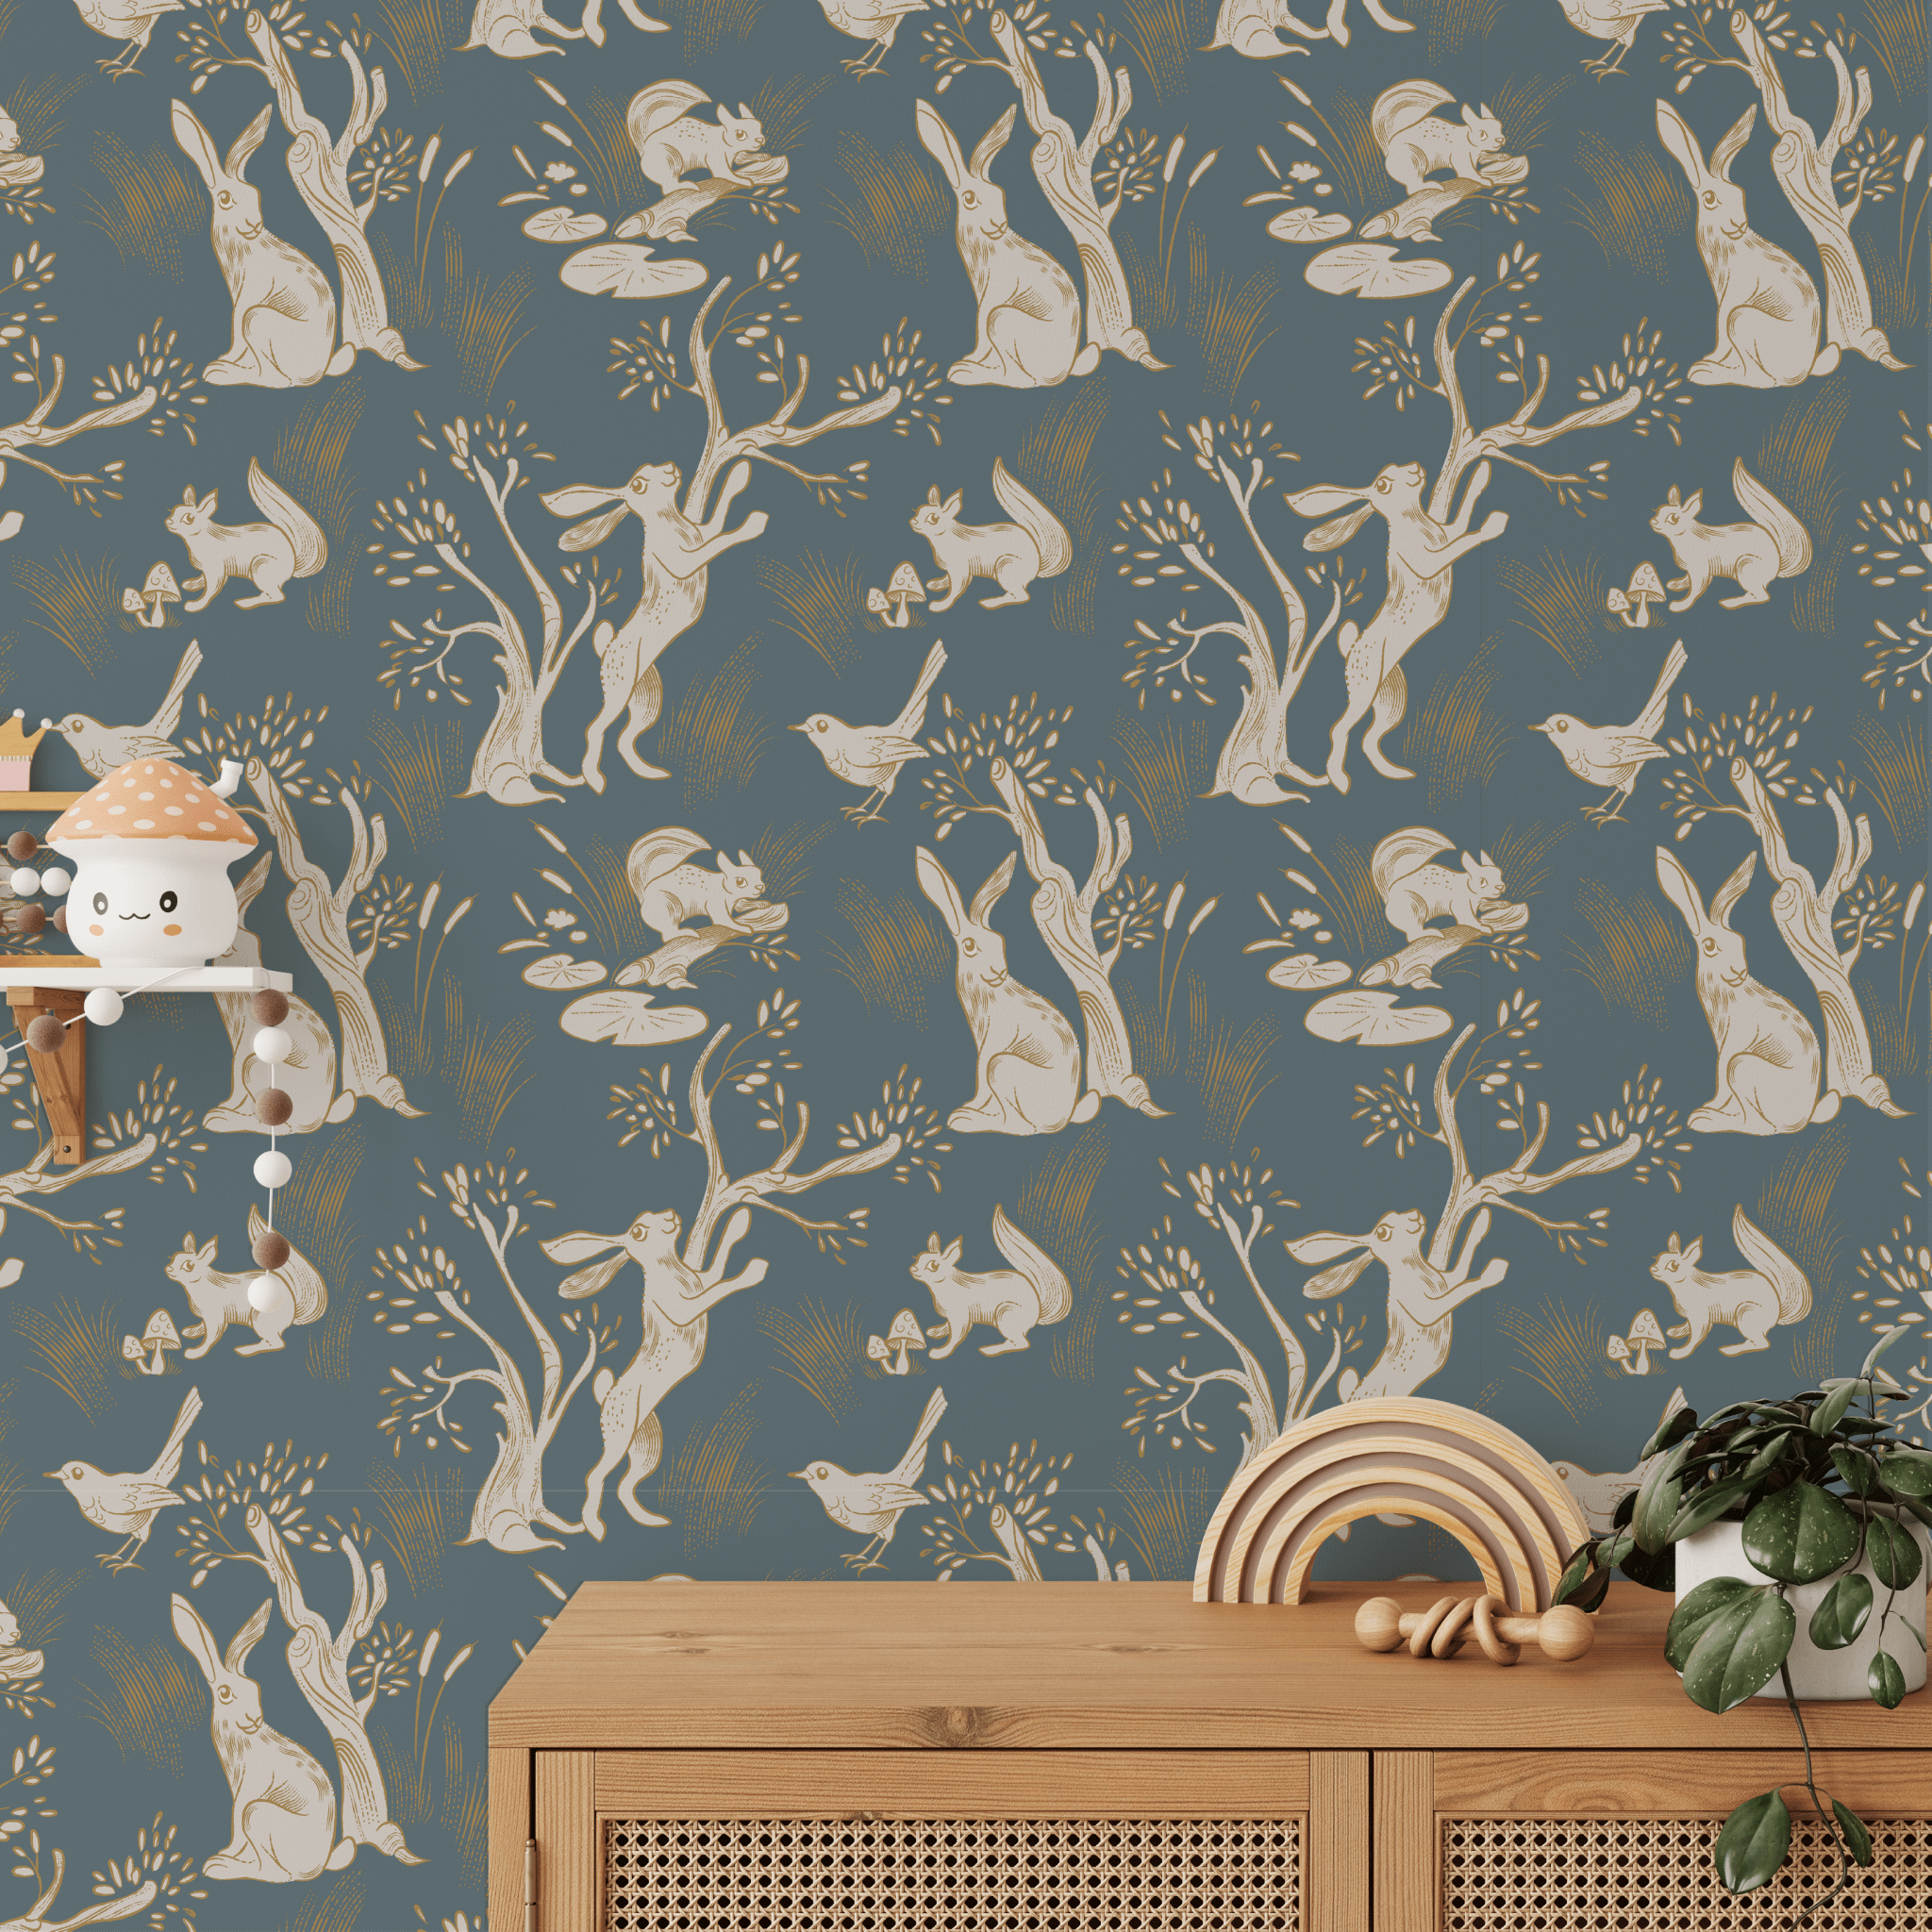 A whimsical children's room featuring a wallpaper with a repetitive pattern of white rabbits in various poses amongst trees and foliage on a blue background. 